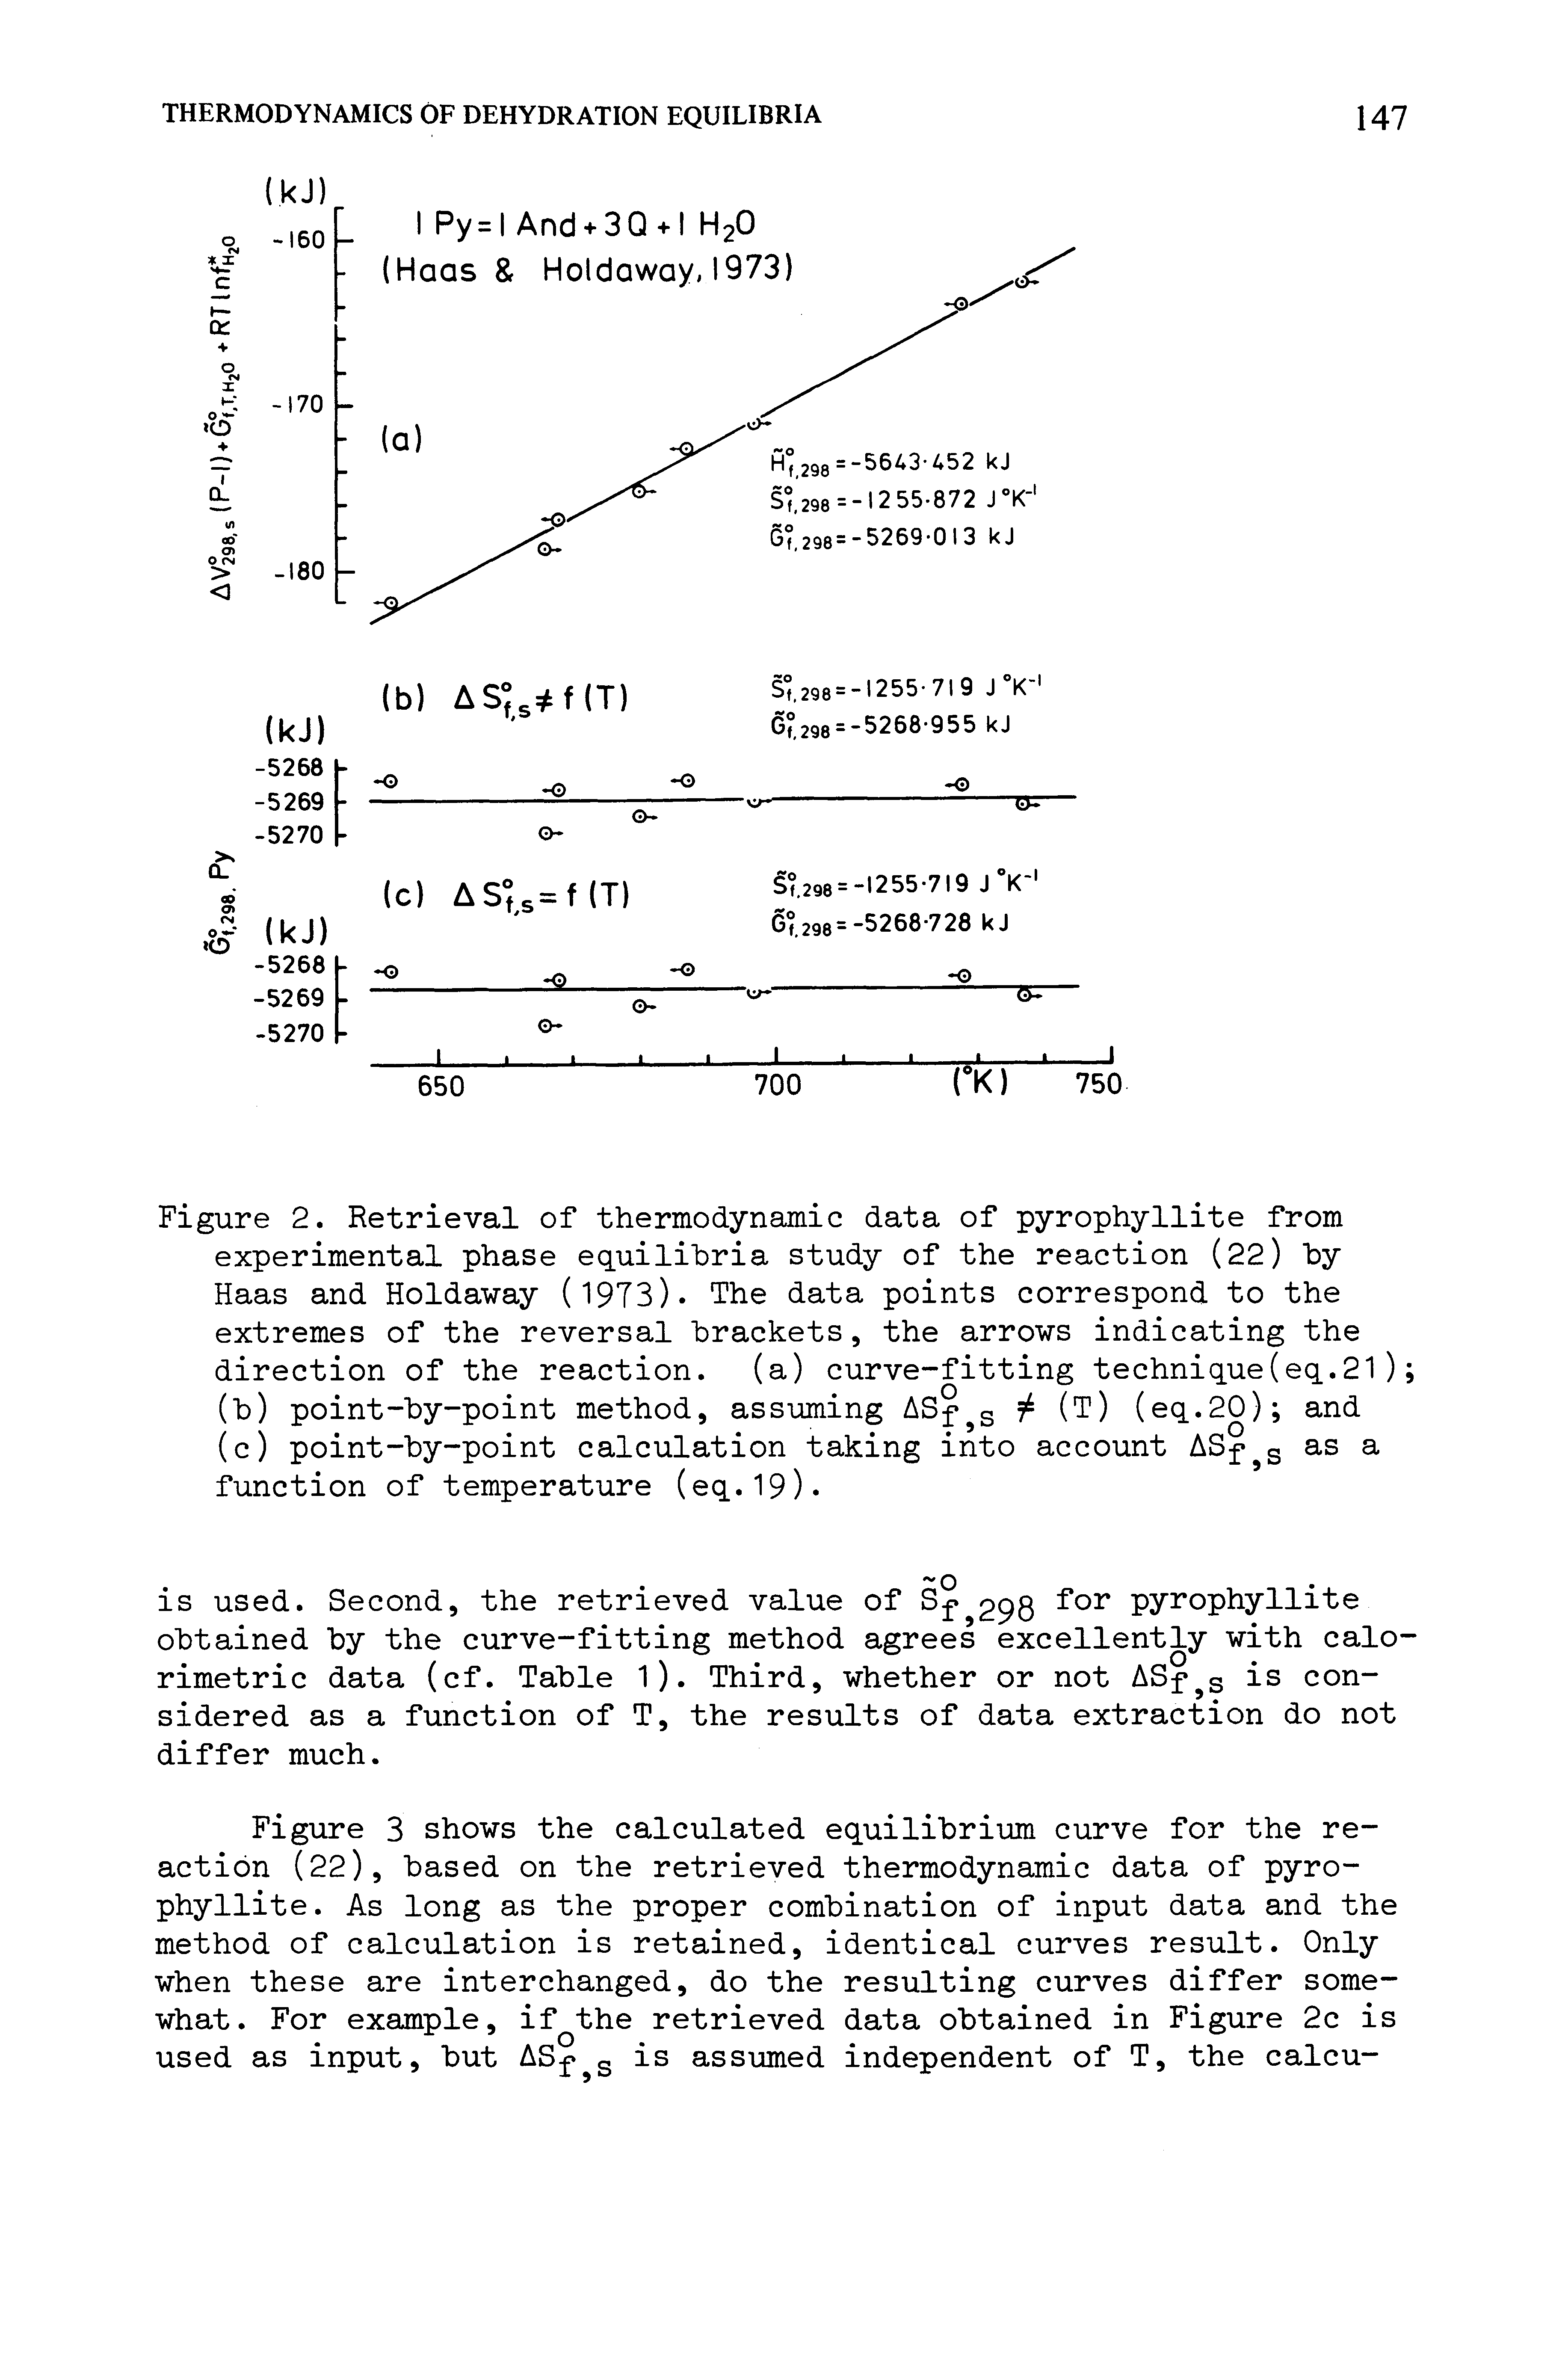 Figure 2. Retrieval of thermodynamic data of pyrophyllite from experimental phase equilibria study of the reaction (22) hy Haas and Holdaway (1973). The data points correspond to the extremes of the reversal brackets, the arrows indicating the direction of the reaction. (a) curve-fitting technique(eq.21) ...